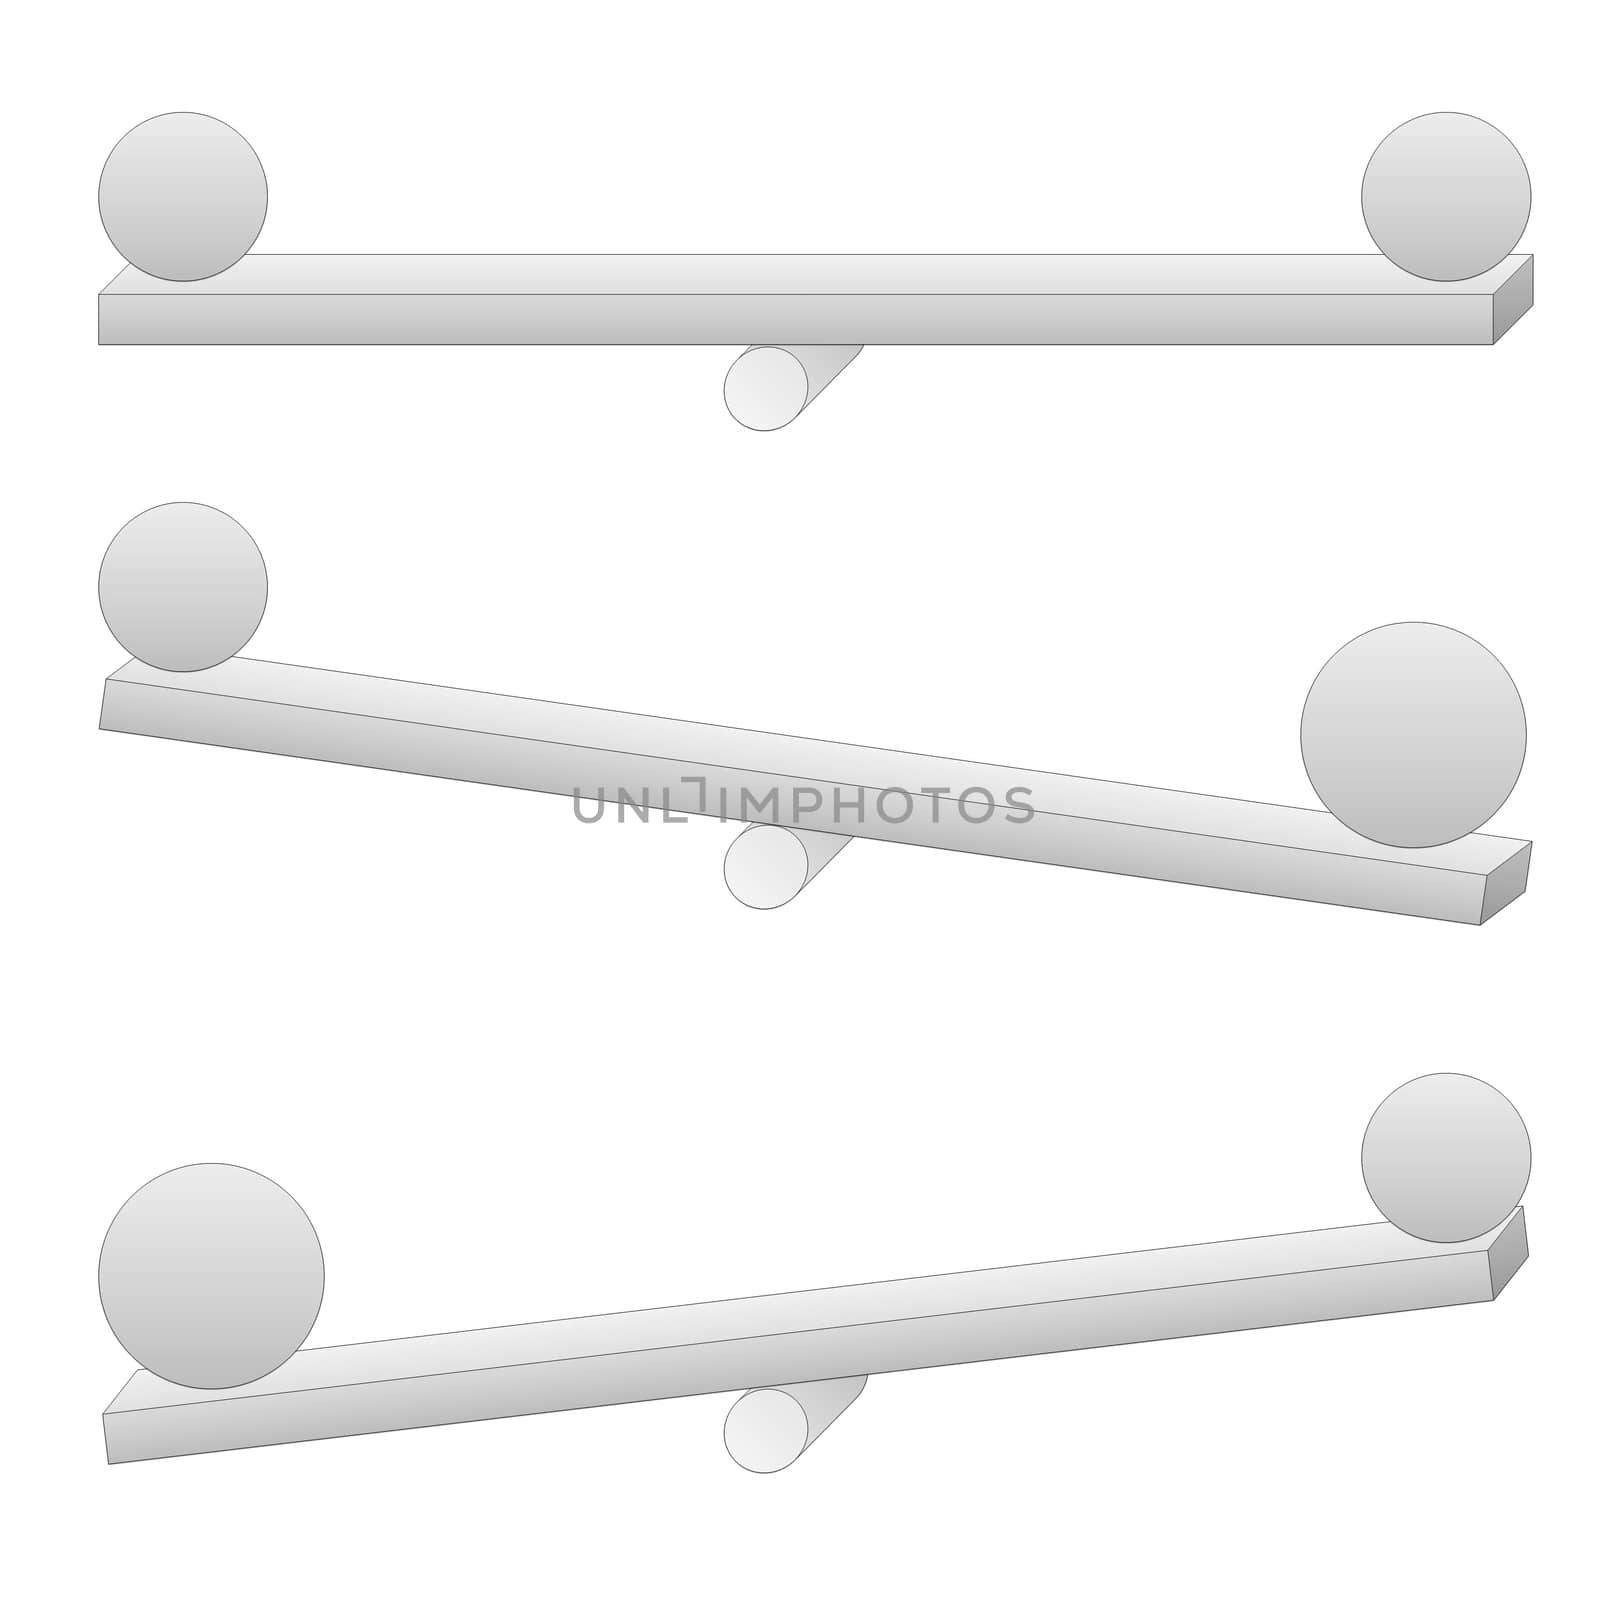 Two grey spheres in balance or not into white background